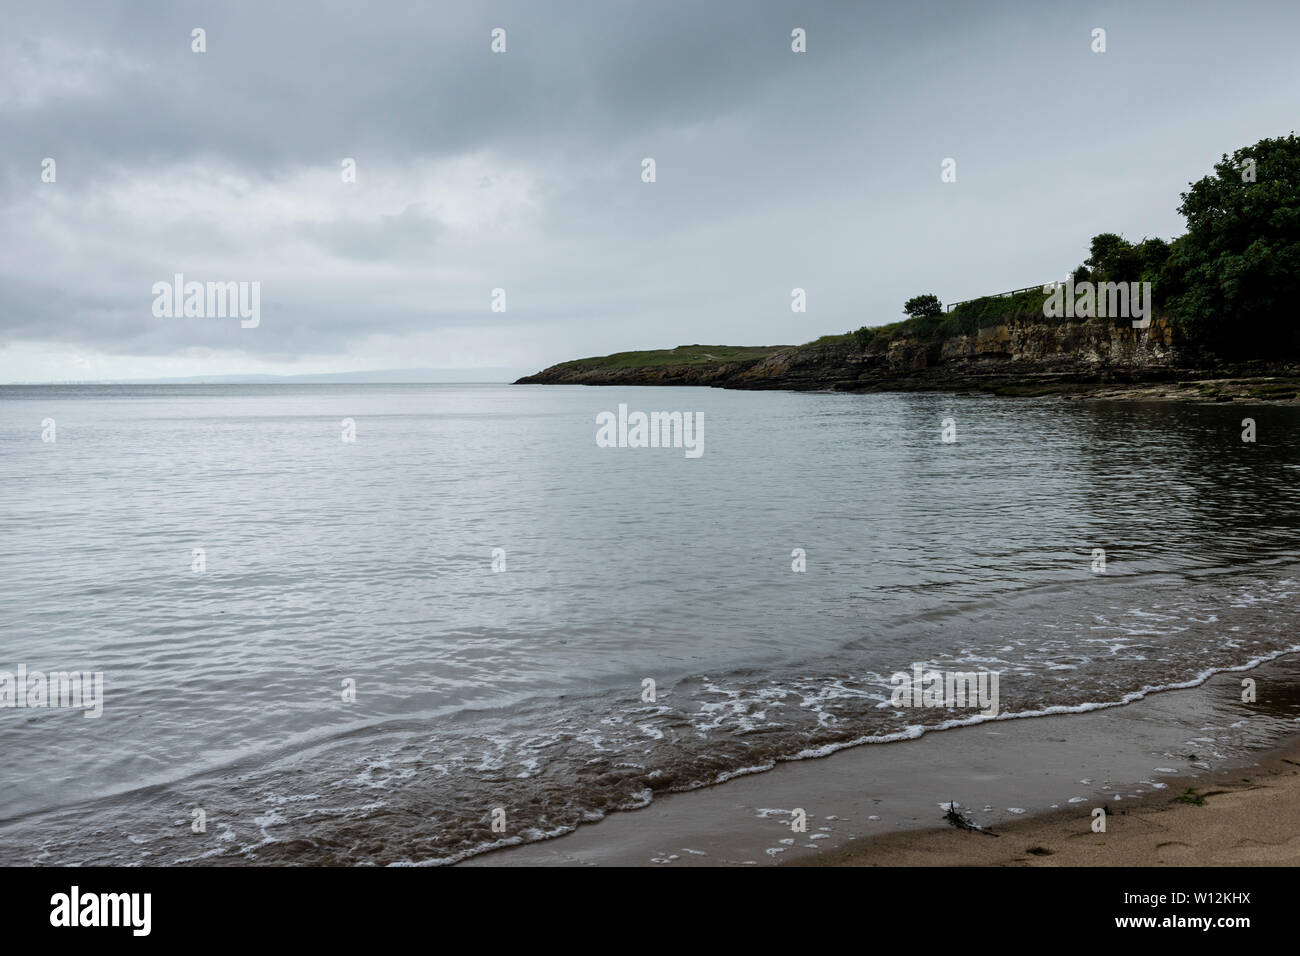 The sea is calm an smooth and barely causes a ripple on the shoreline. In the background Friar's Point is a dark headland under a stormy sky. Stock Photo